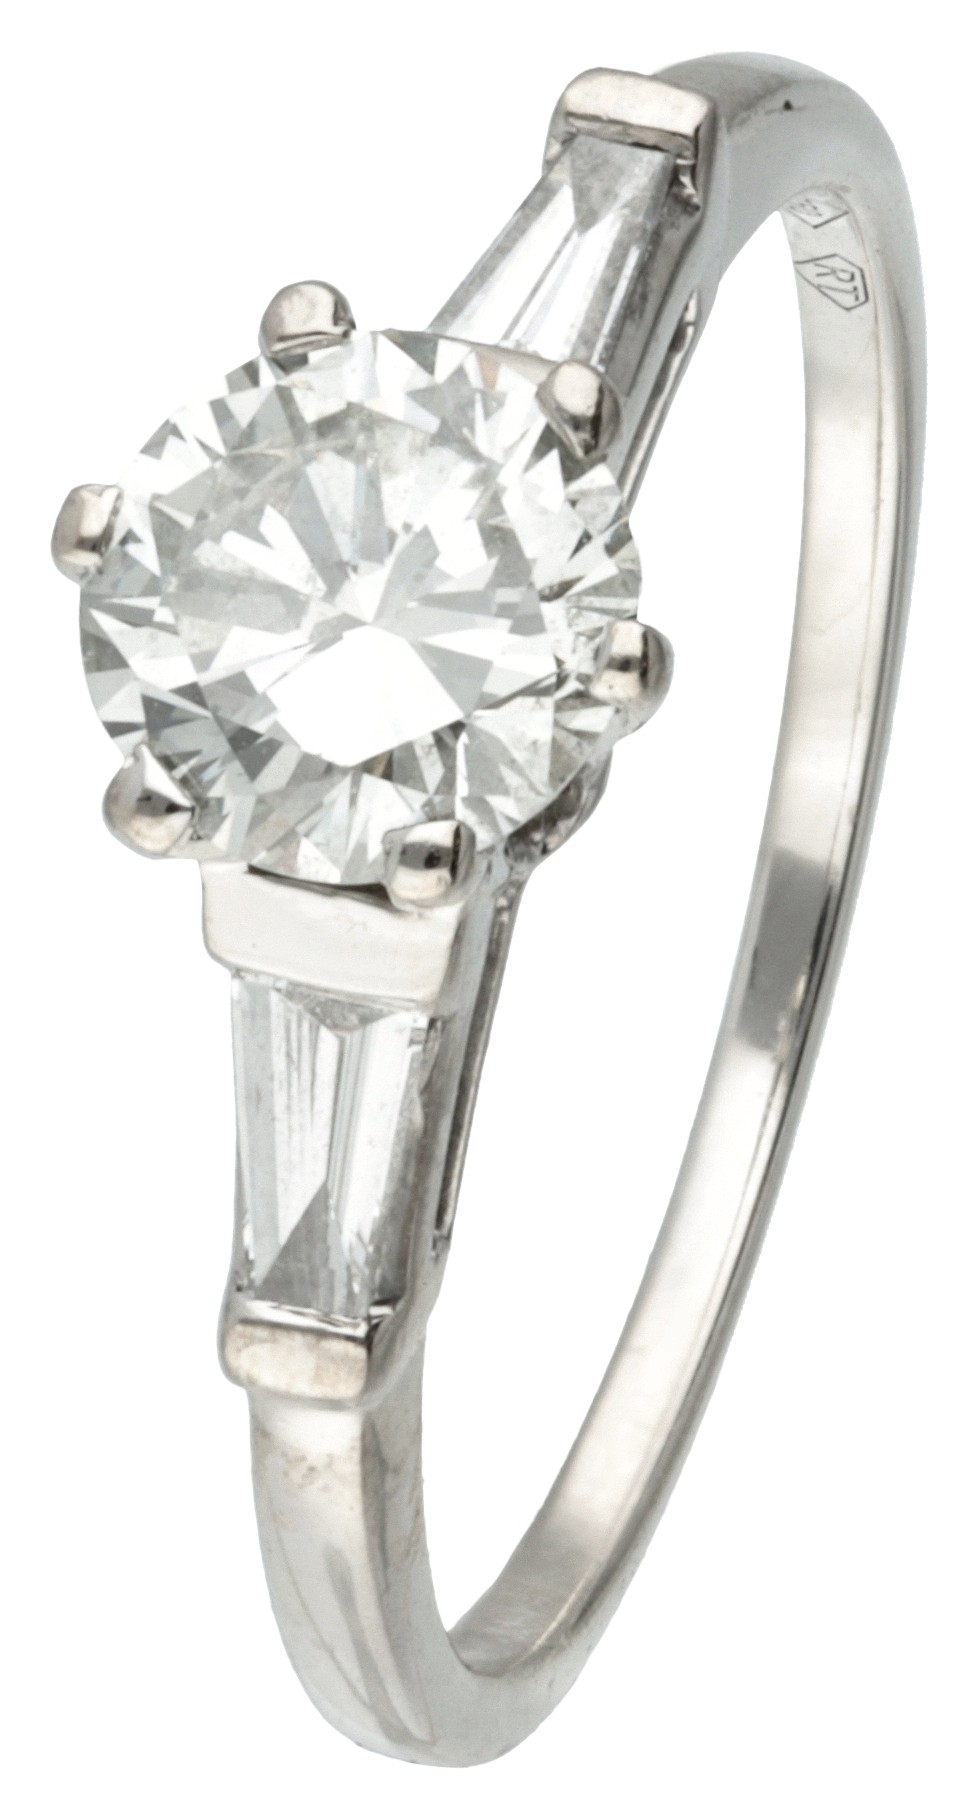 18K. White gold solitaire ring with approx. 0.80 ct. diamond.